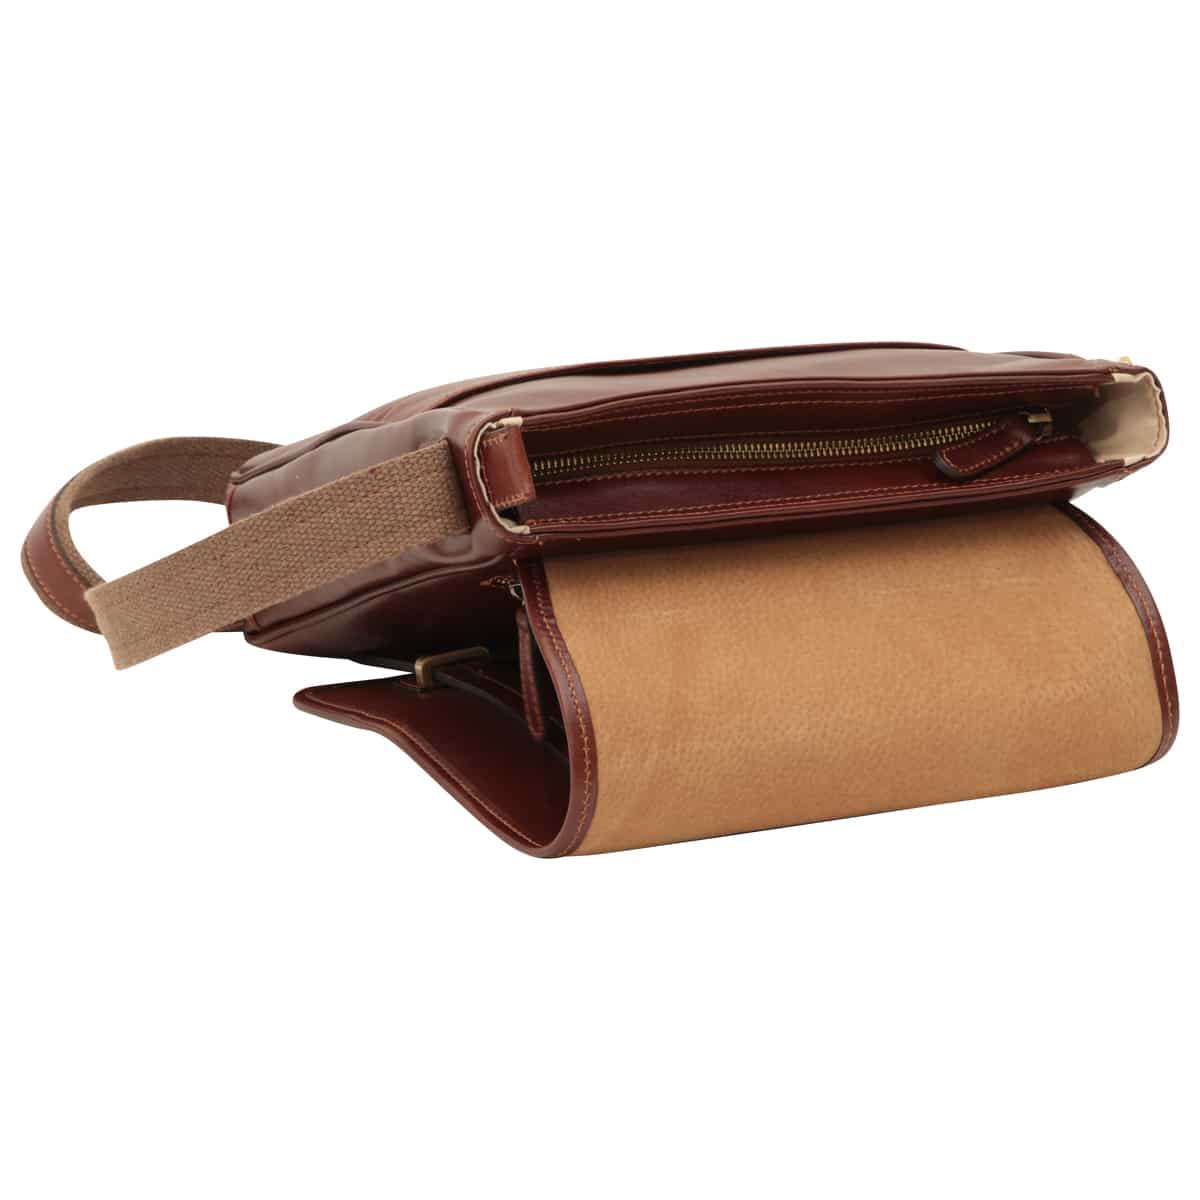 Medium leather bag with double magnetic closure - Brown  | 406589MA | EURO | Old Angler Firenze